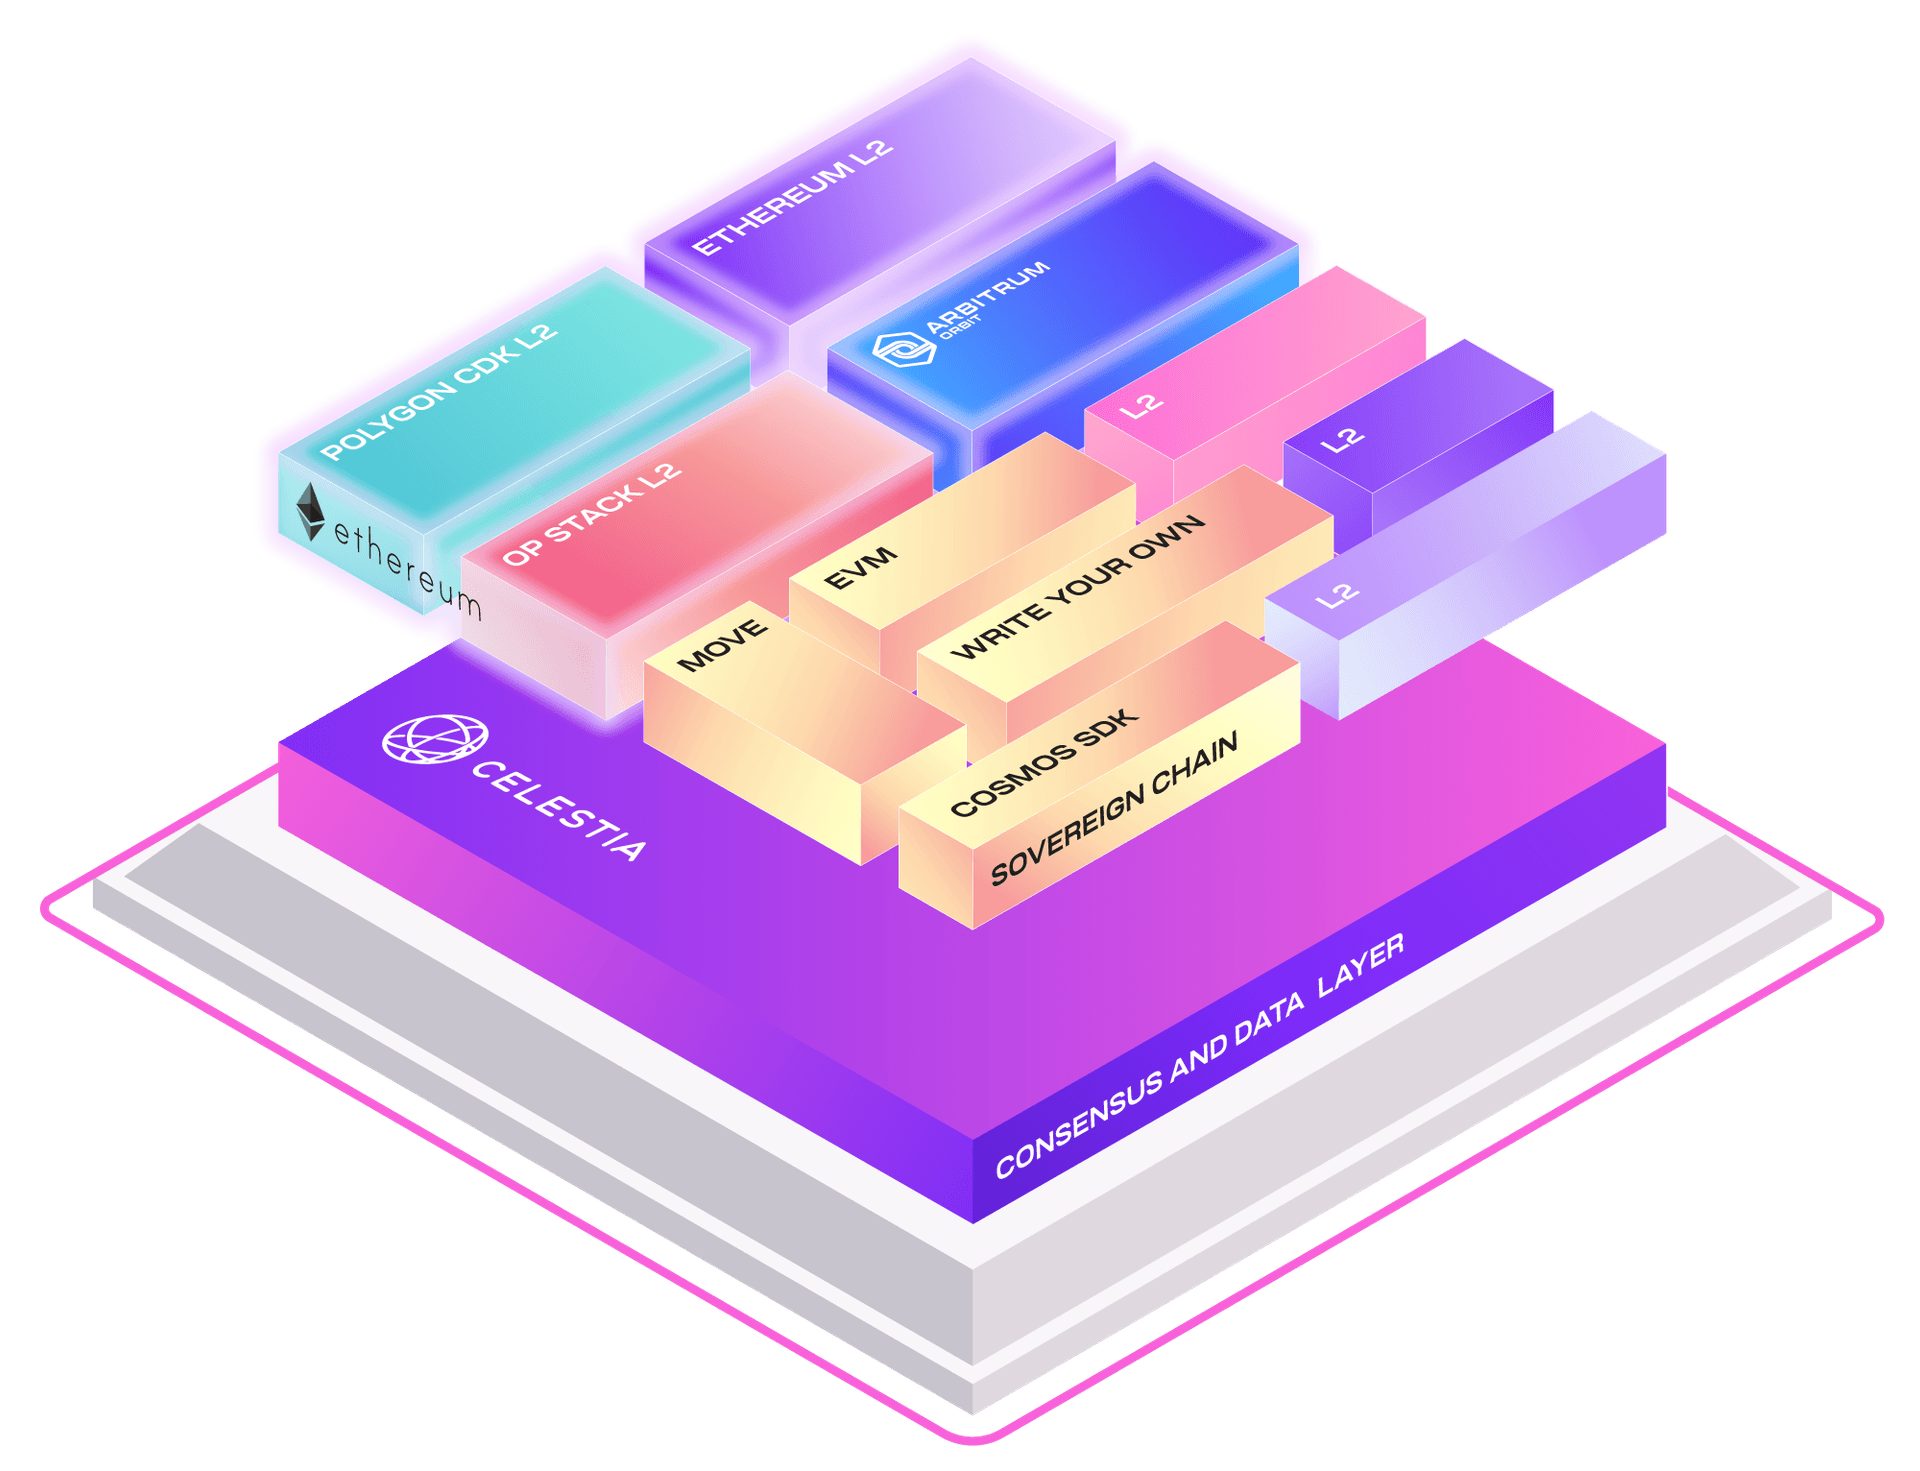 What Is Celestia? Data Availability Layer